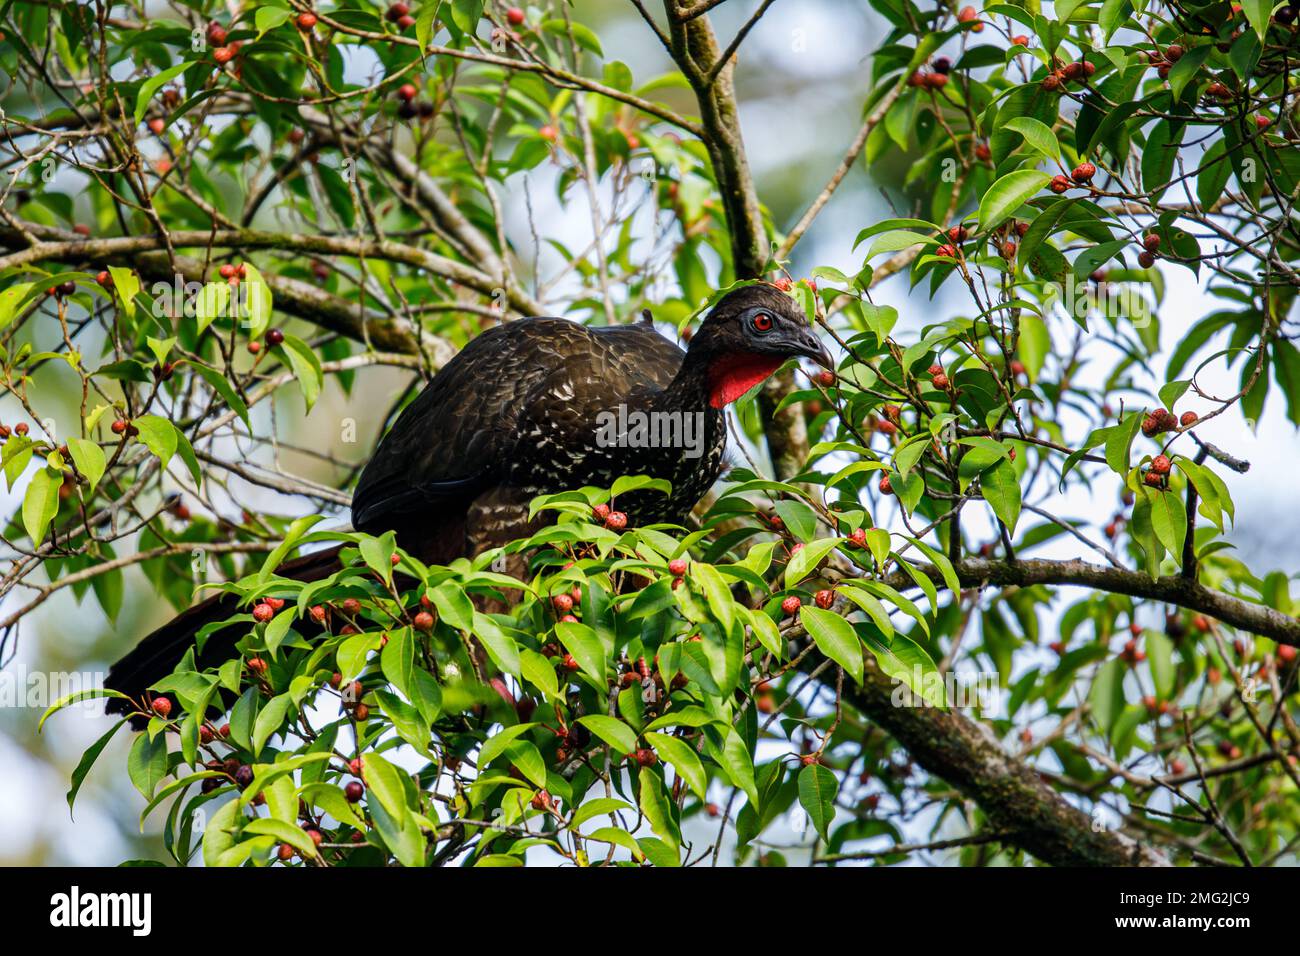 Crested guan (Penelope purpurascens) foraging in the trees in Arenal Volcano National Park, Providencia de Alajuela, Costa Rica. Stock Photo